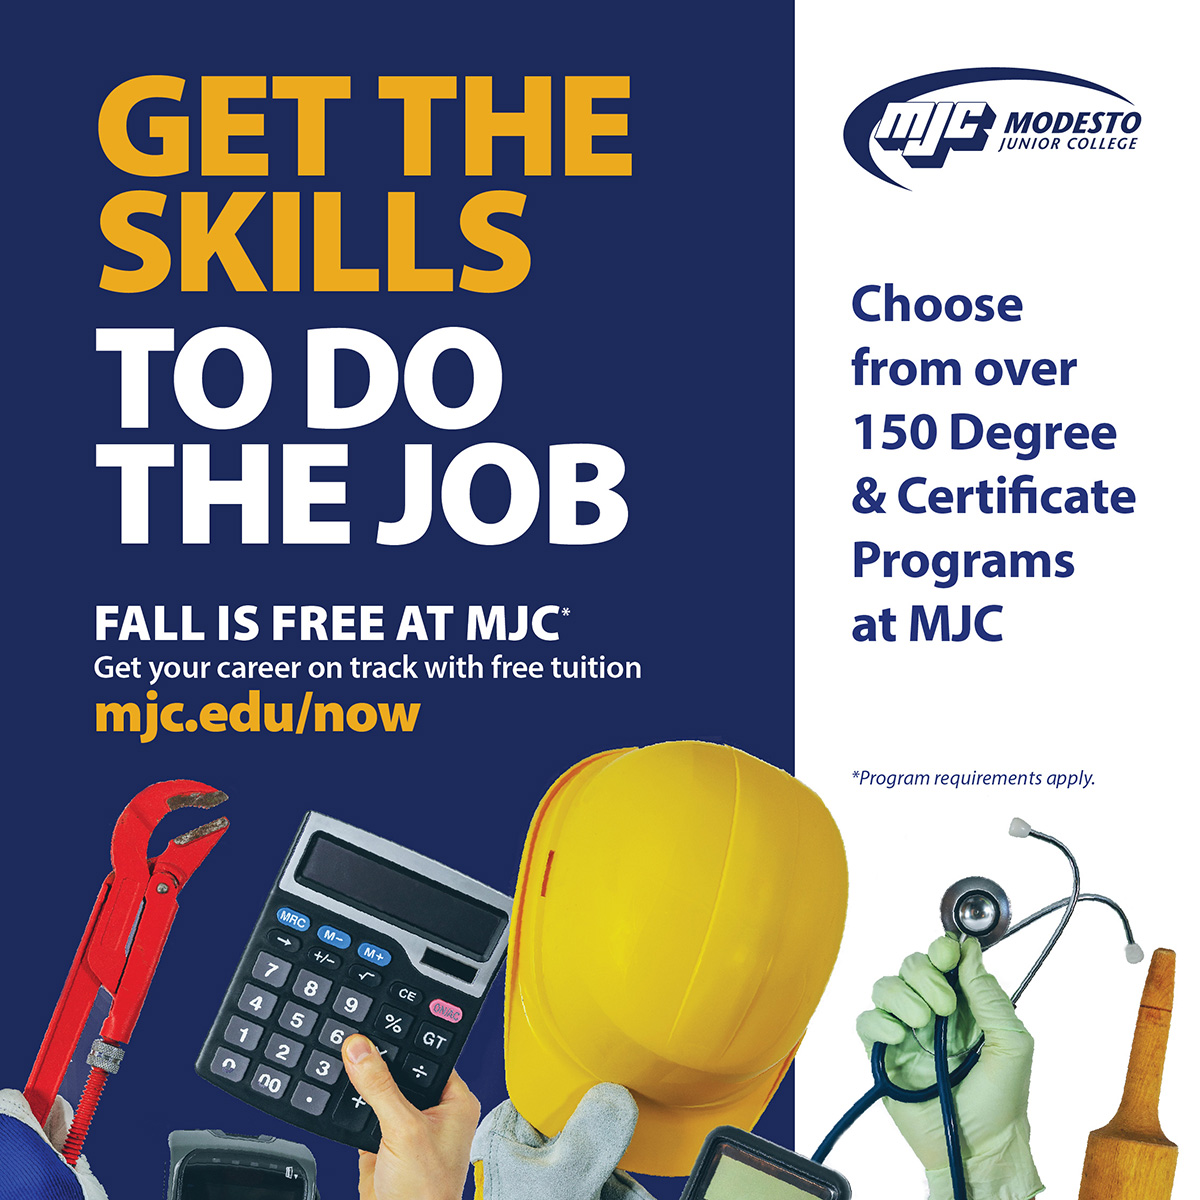 Get the skills to do the job! Fall is free at MJC. Get your career on track with free tuition. Choose from over 150 degree and certificate programs